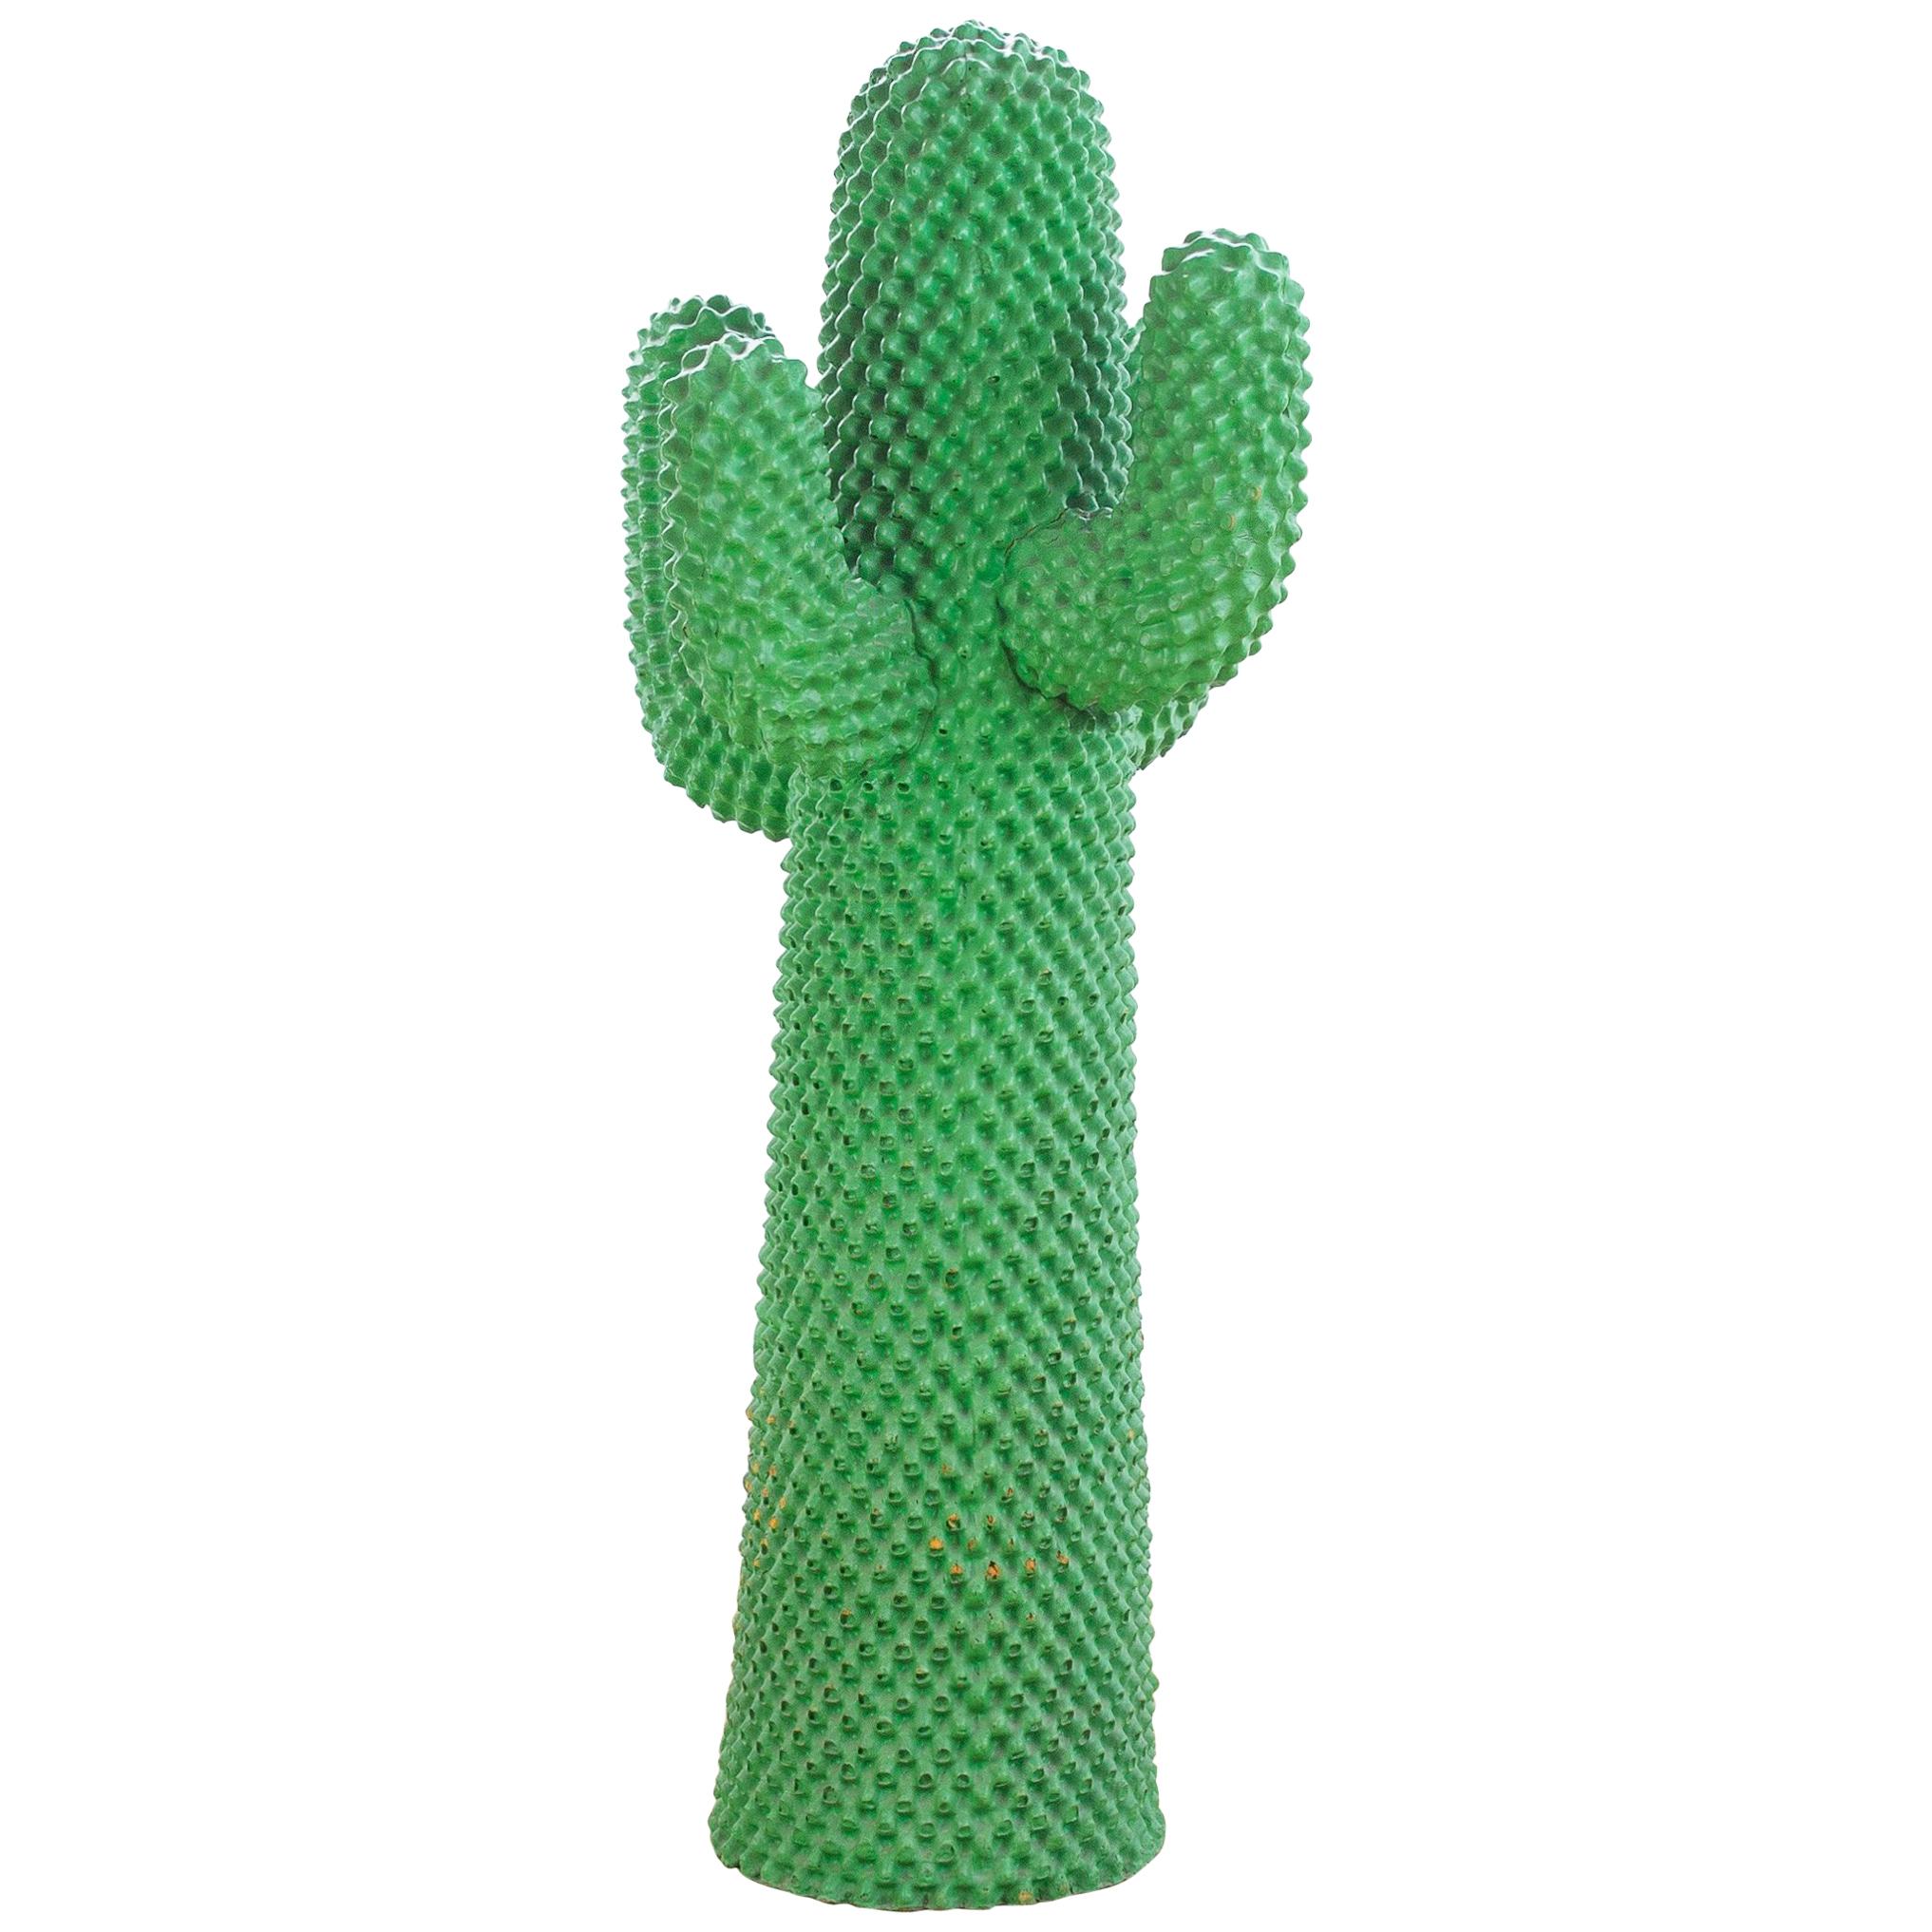 Early Post 70 Cactus Coat Hanger Edited by Gufram, Designed by Drocco and Mello